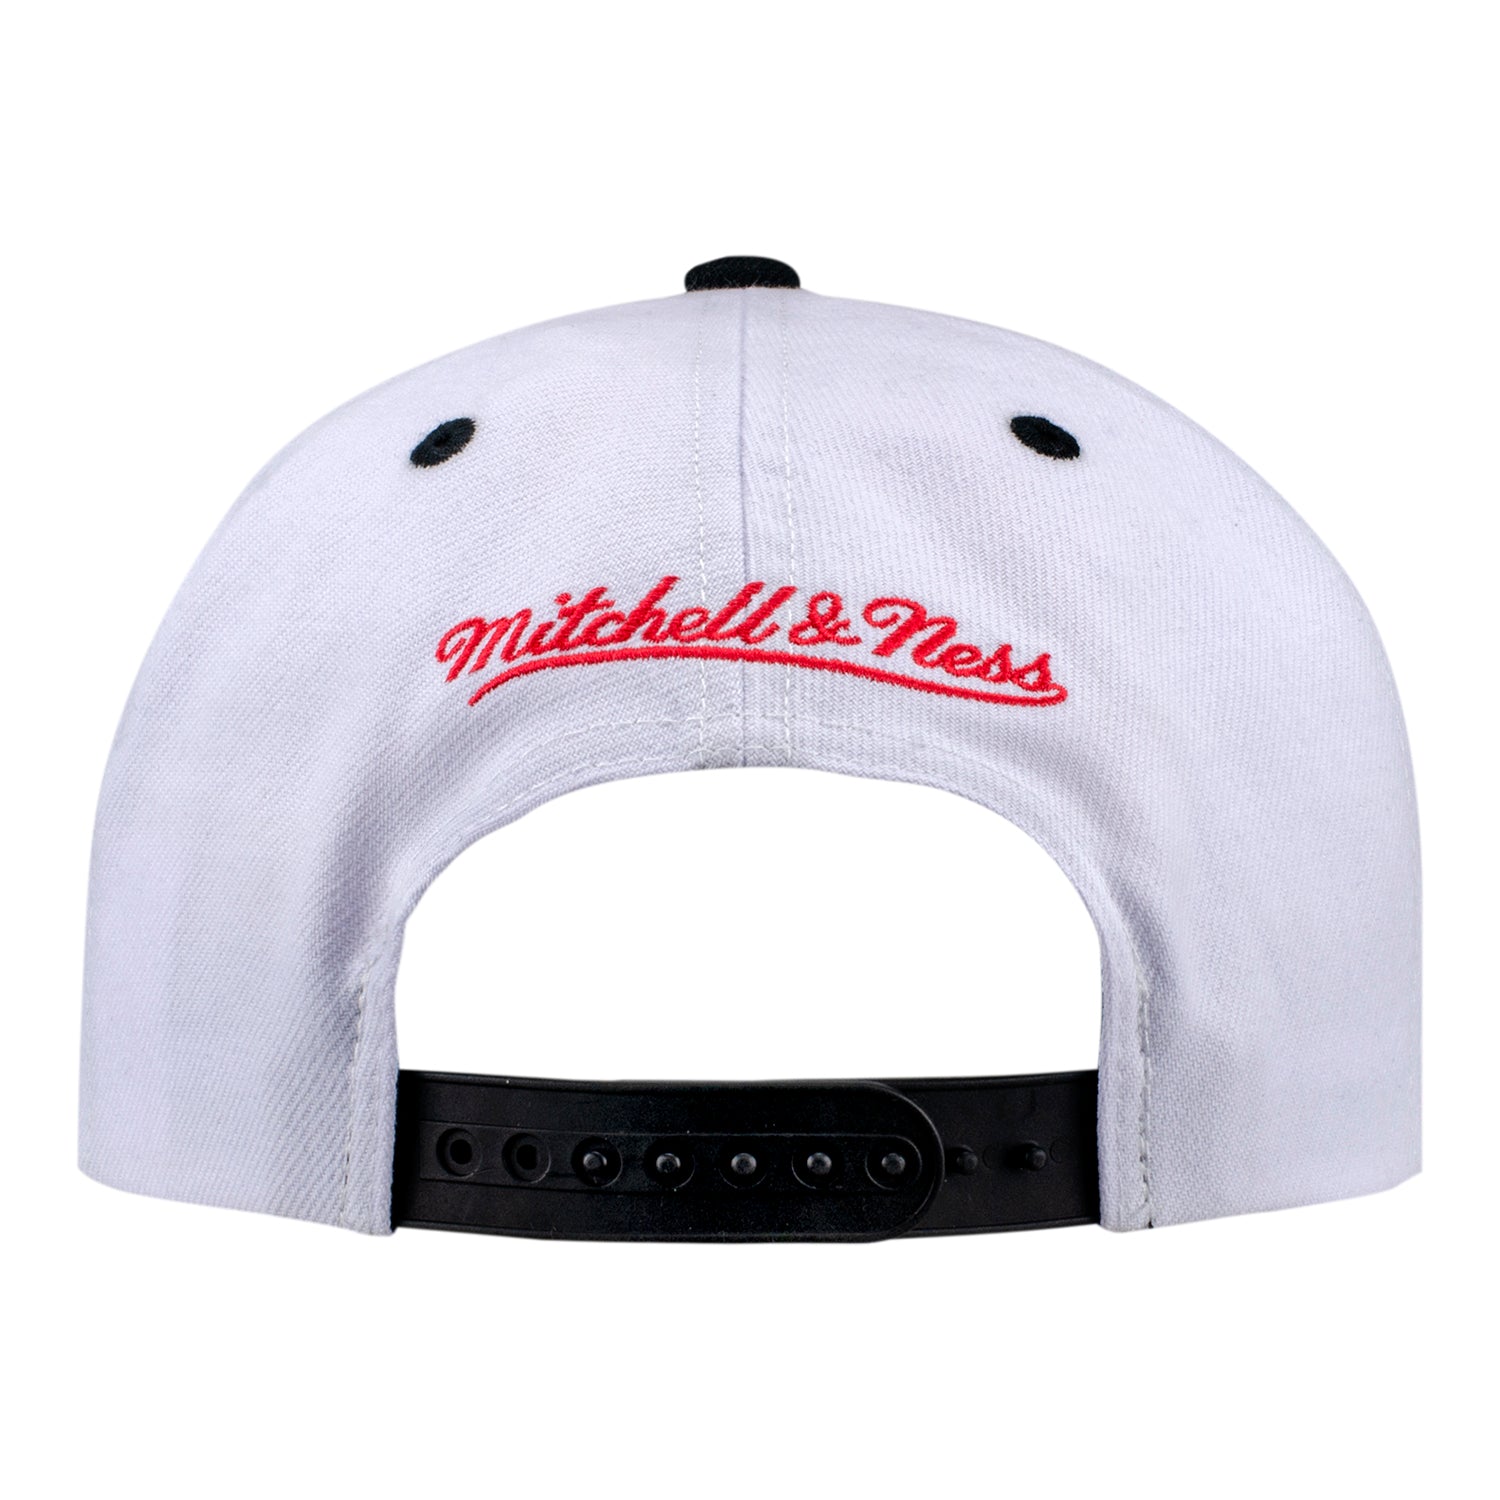 Mitchell & Ness All-Star Tee & Hat Gift Box